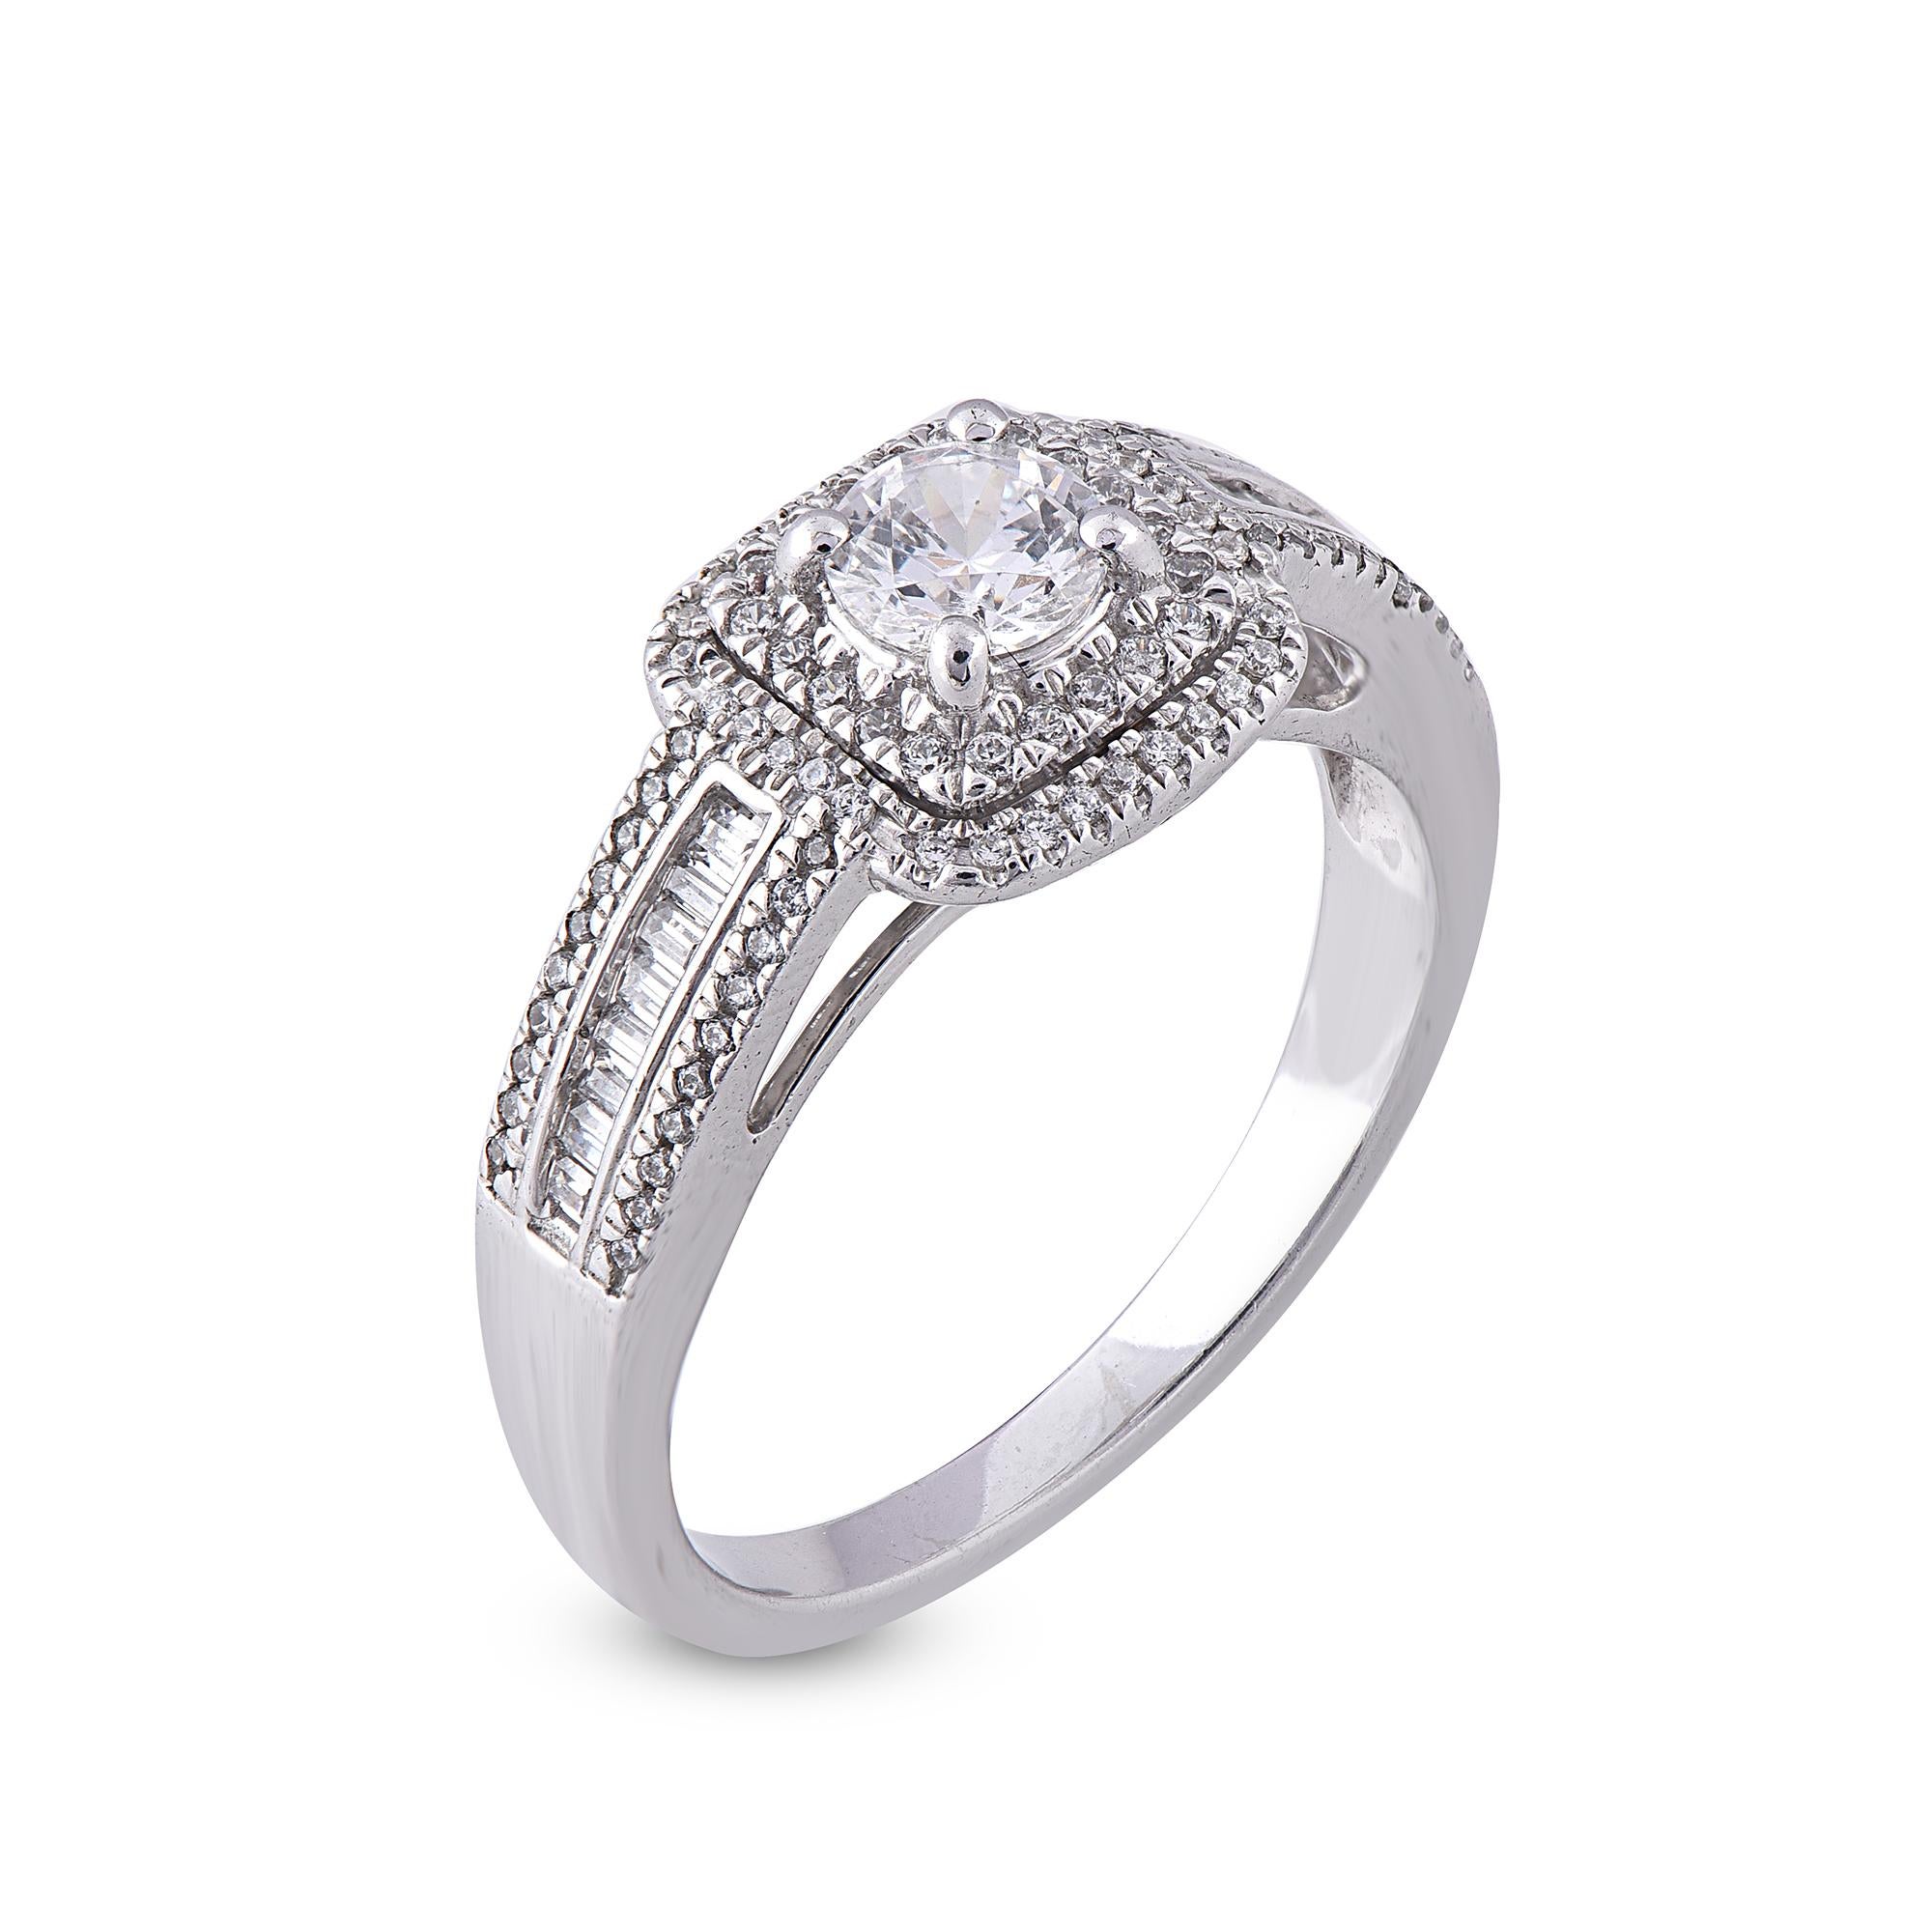 Graceful and shimmerind diamond engagement ring is studded with 91 round and 18 Baguette diamonds beautifully set in prong and channel setting. Fashioned in 18 Karat White Gold and 0.75ct total diamond weight and G-H color & SI1-2 clarity.
